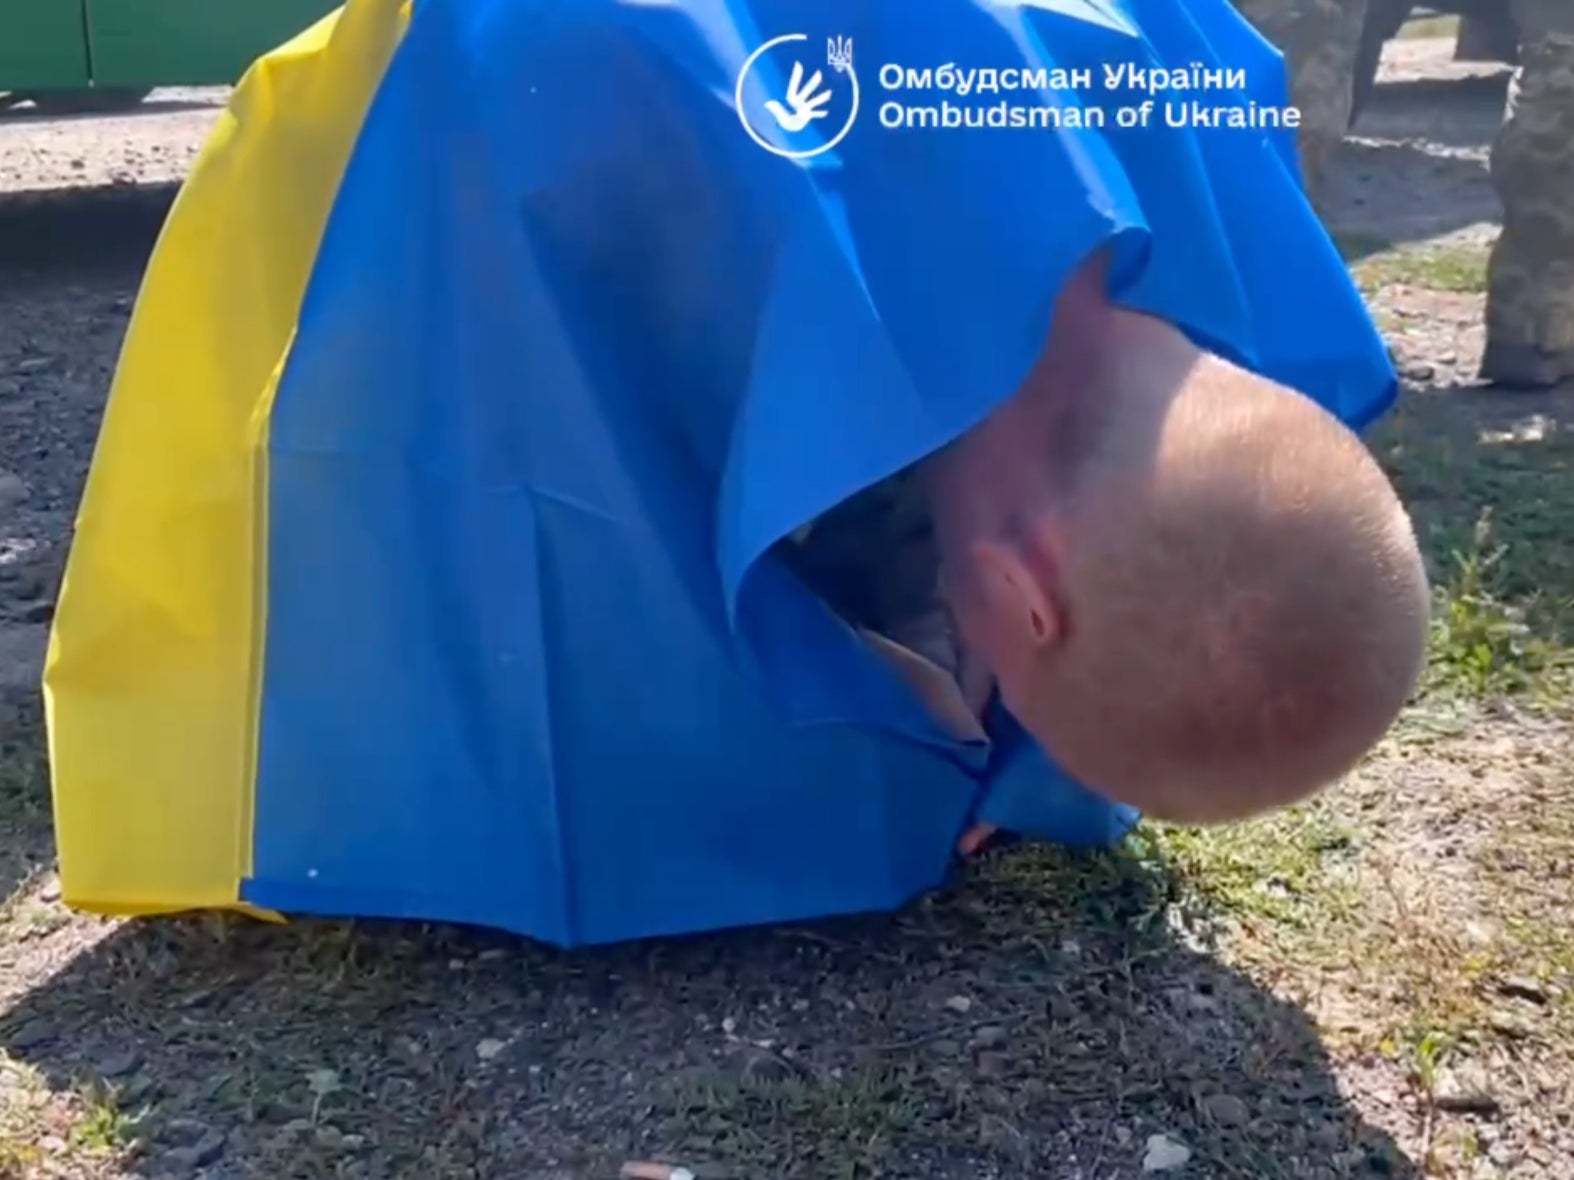 A soldier clutching a Ukrainian flag collapses after returning to his homeland